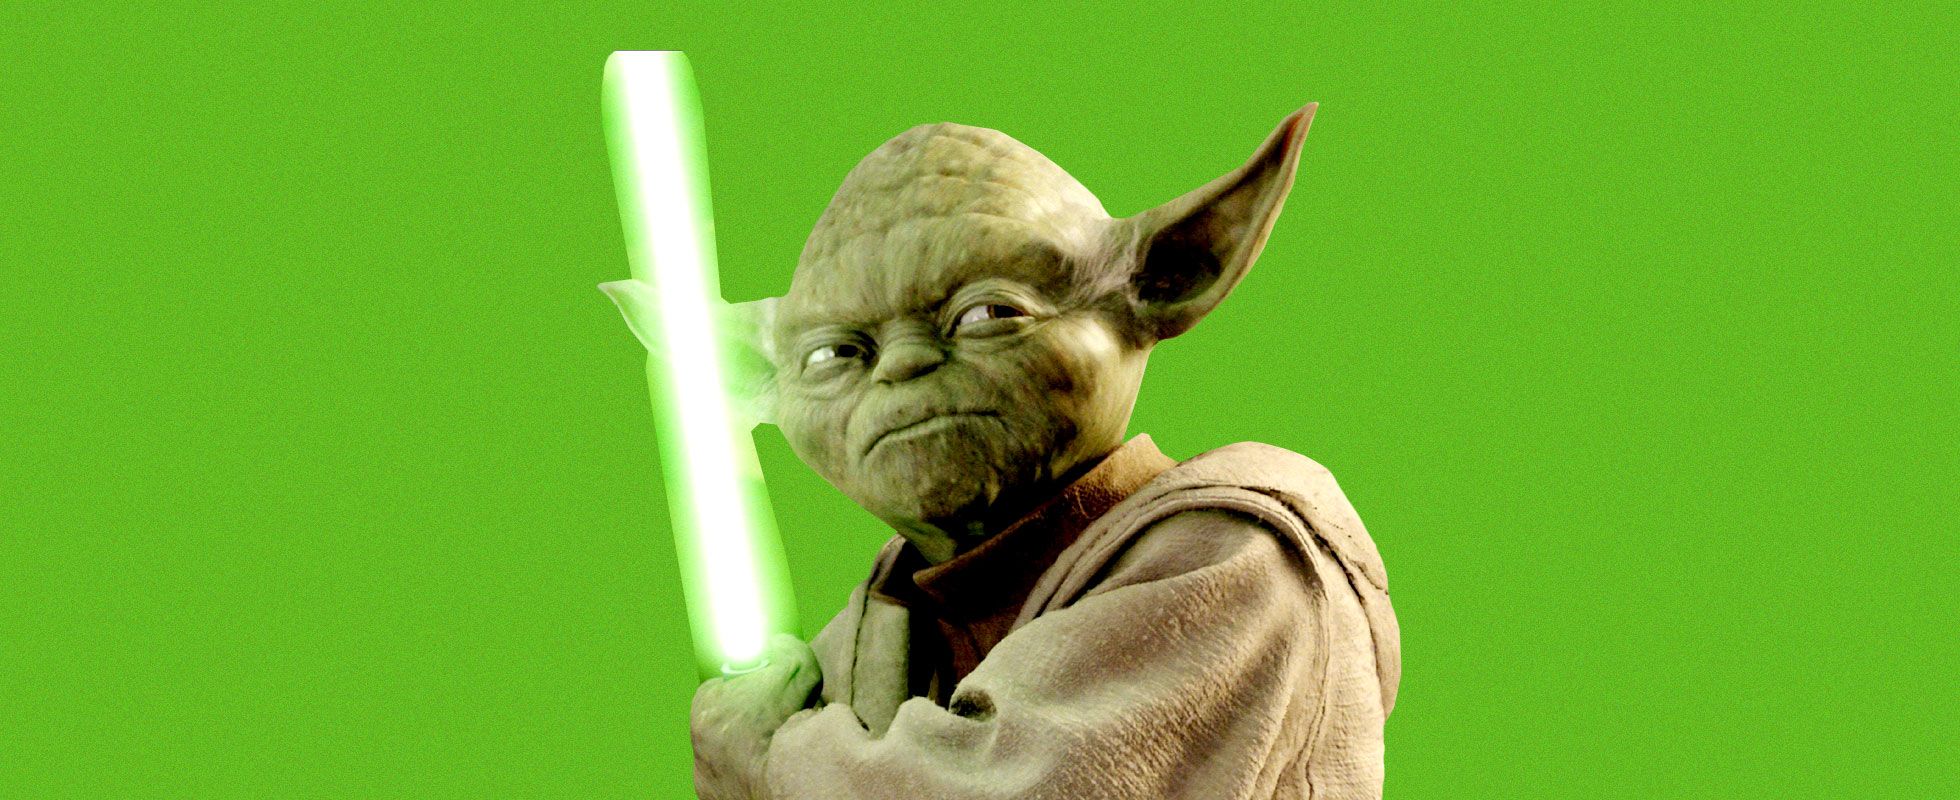 14 Wise Quotes From Jedi Master Yoda | Inspiring Quotes